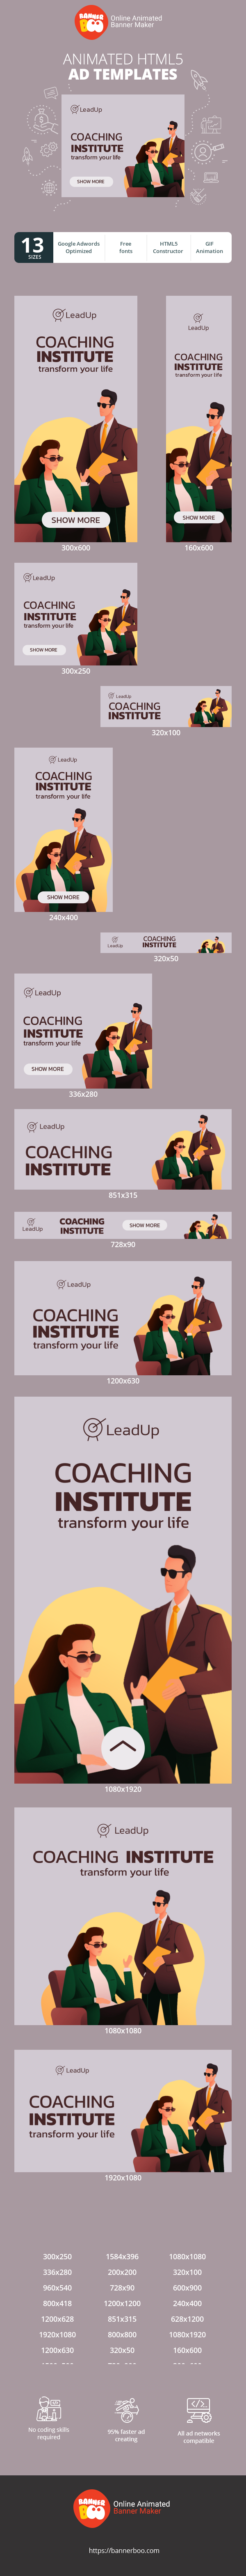 Banner ad template — Coaching Institute — Transform Your Life